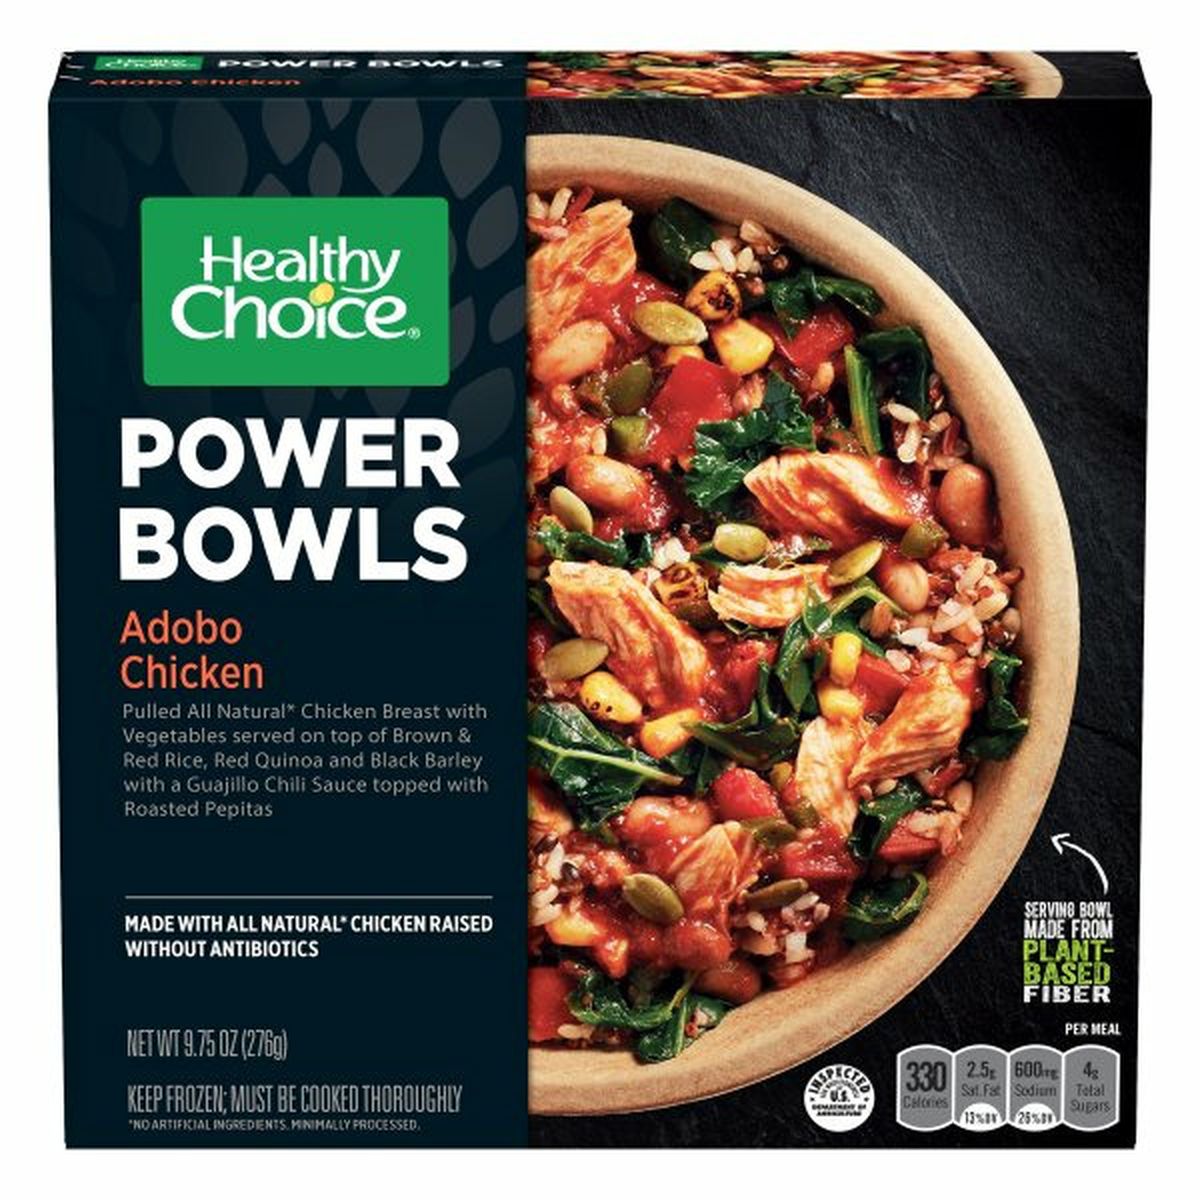 Calories in Healthy Choice Power Bowls, Adobo Chicken